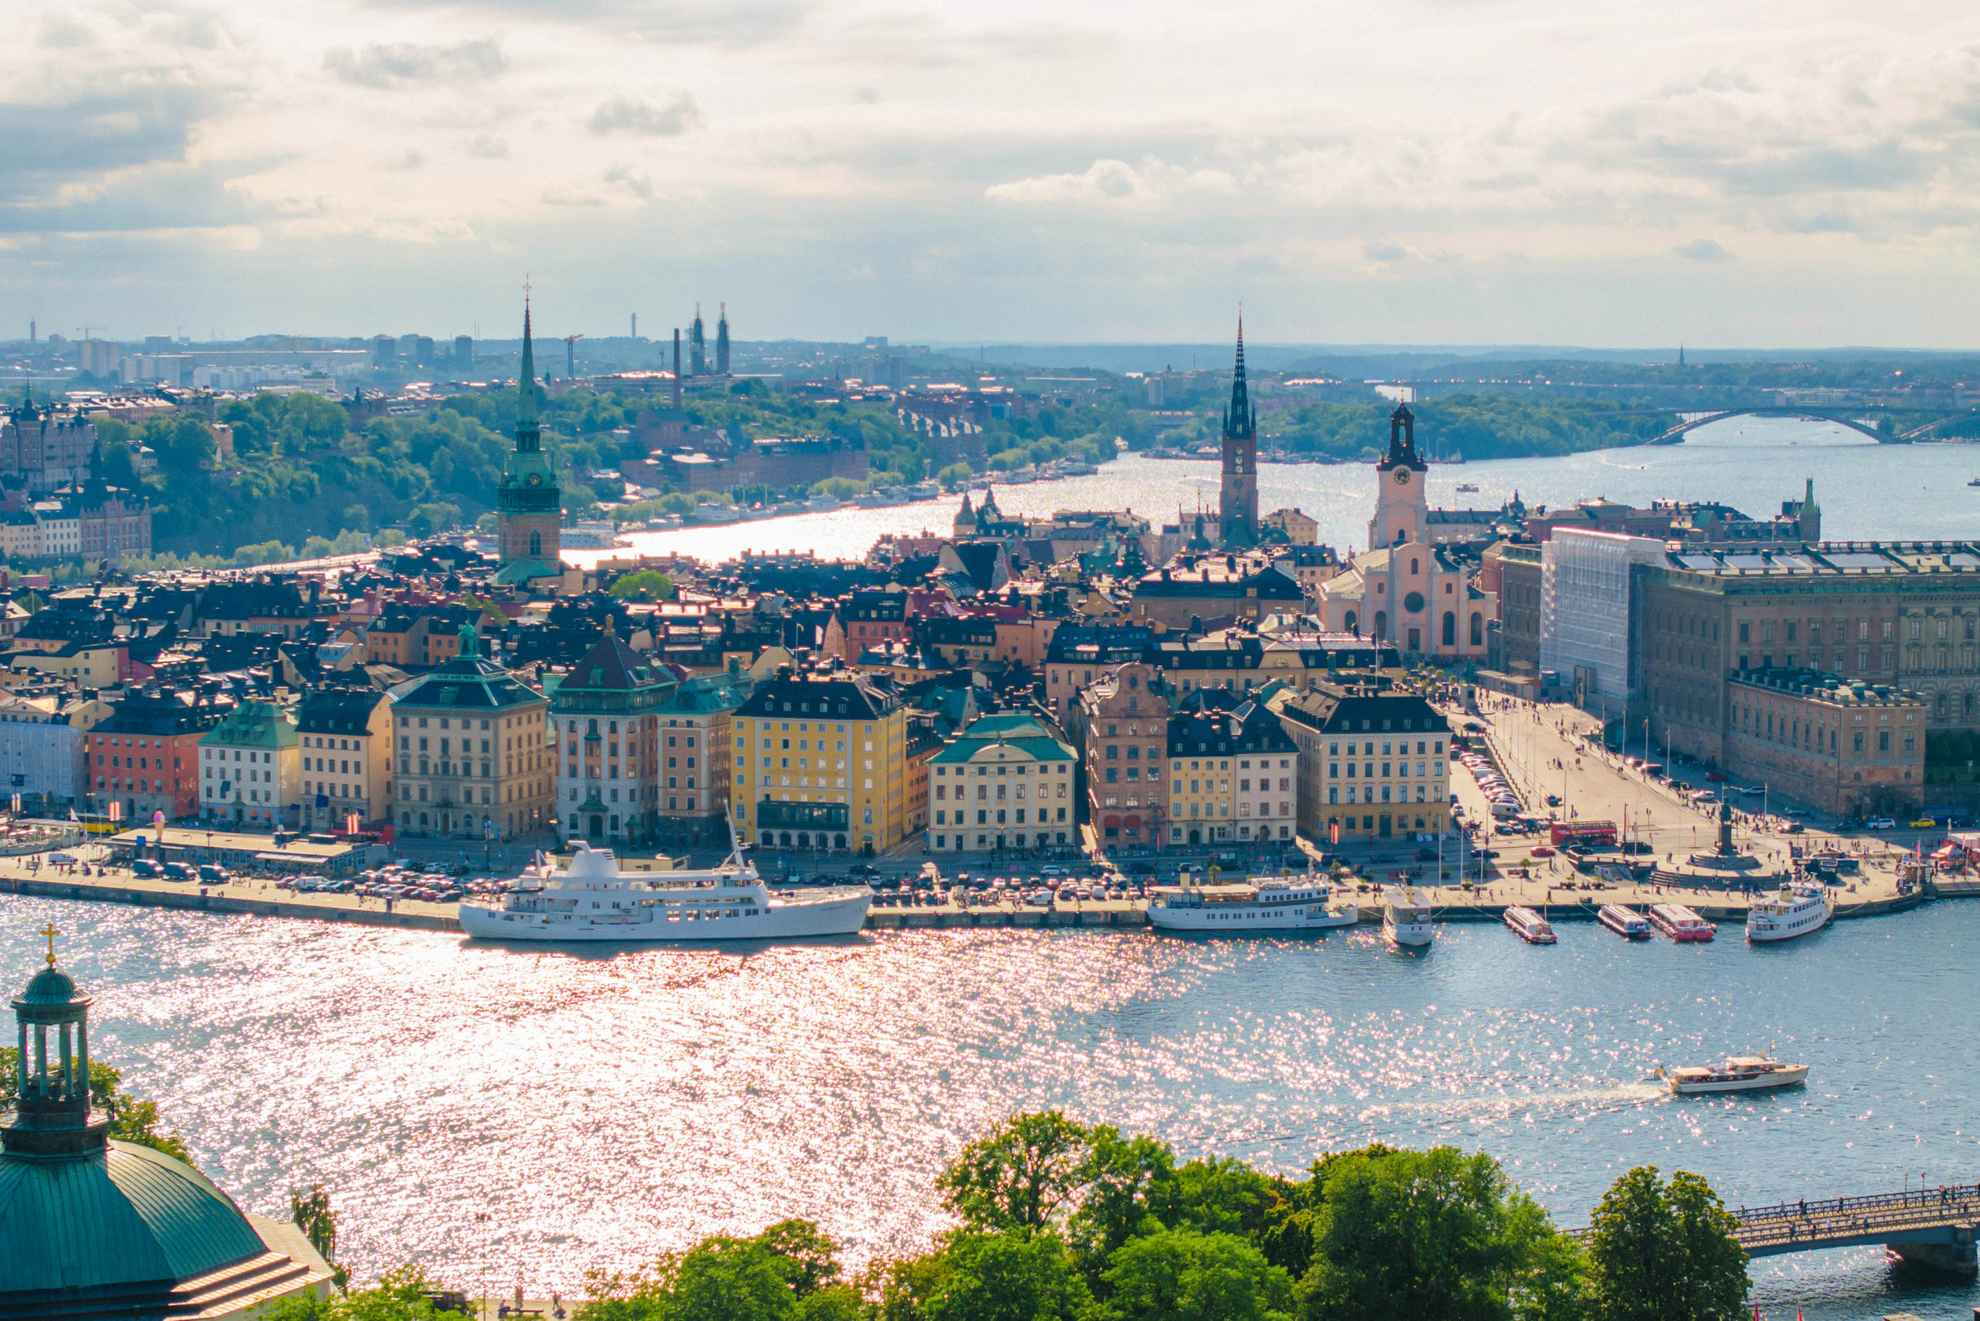 An aerial view of the Old Town in Stockholm.